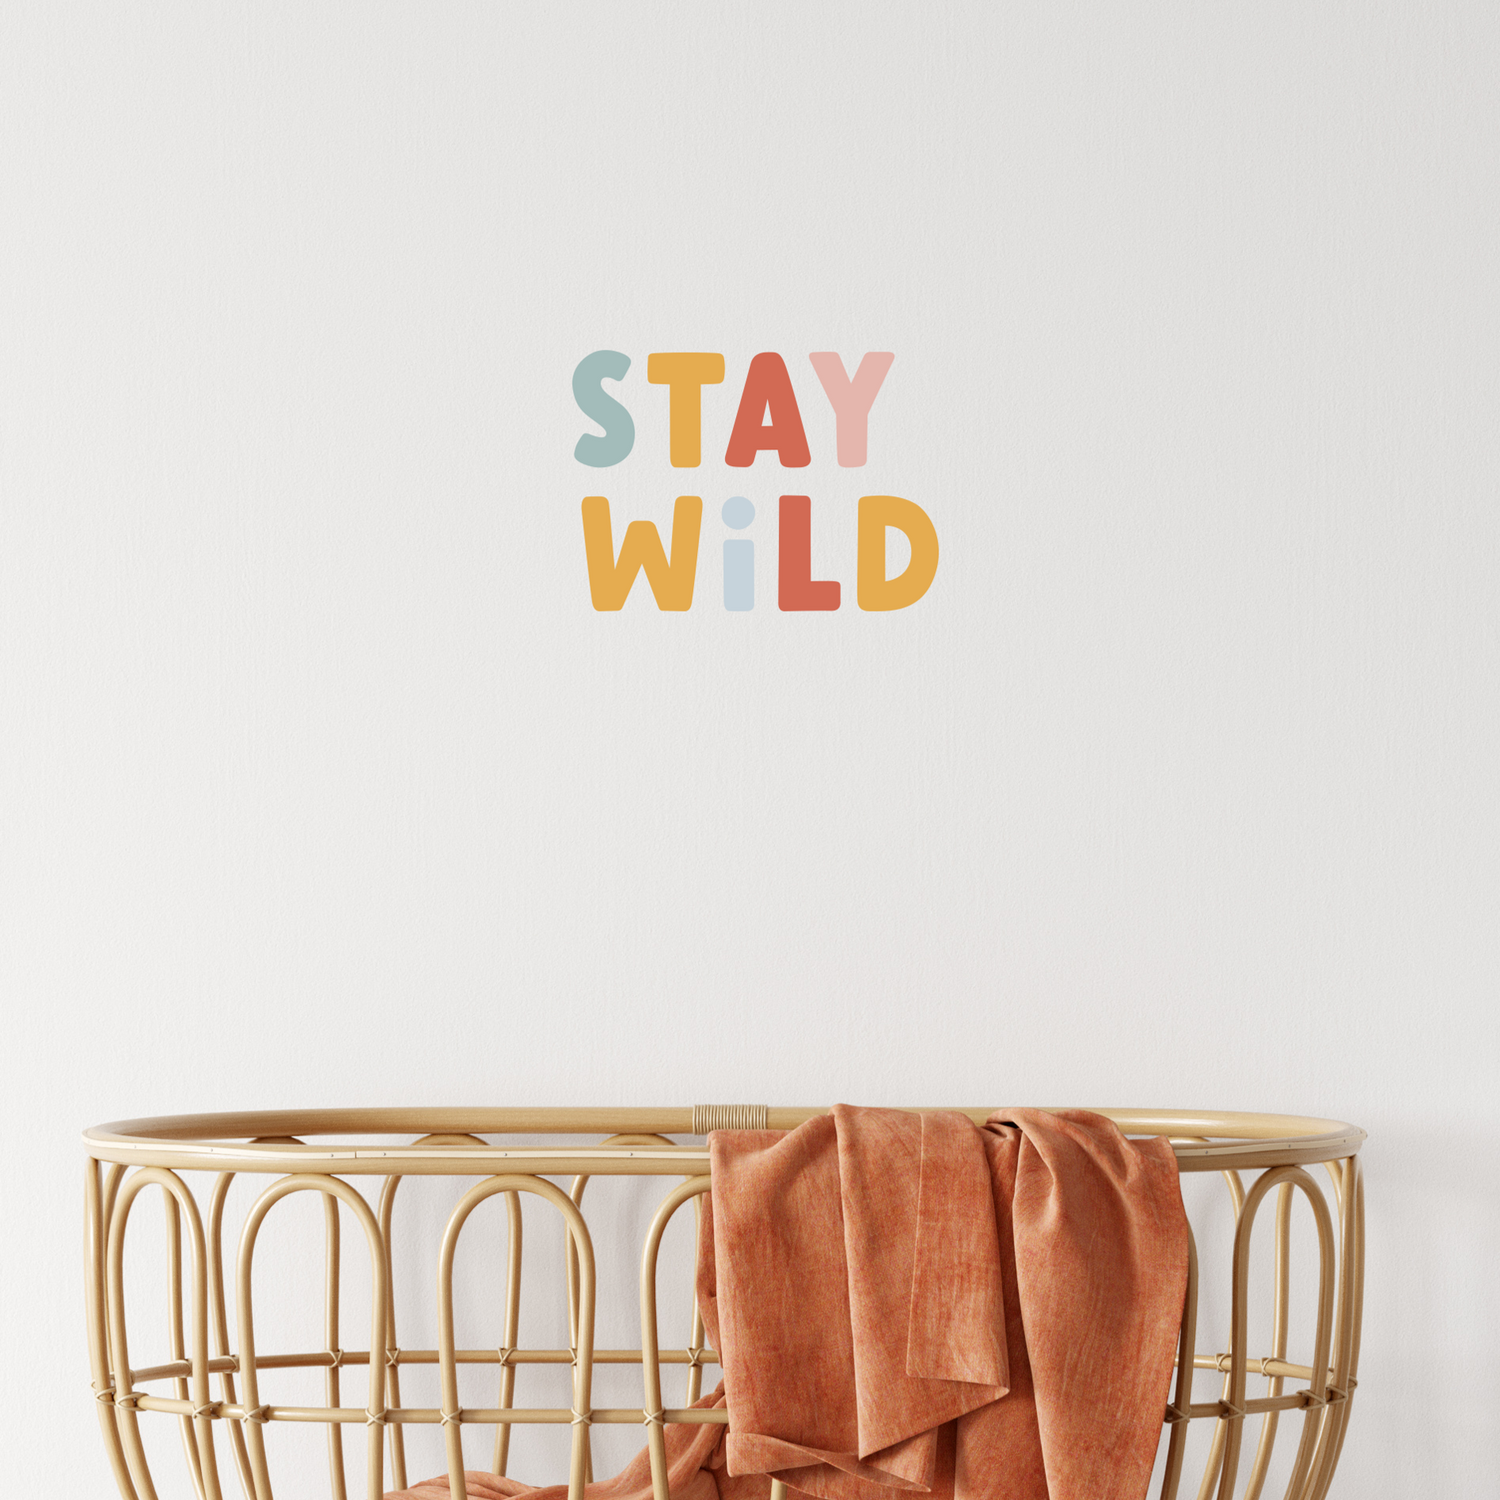 'Stay Wild' Fabric Wall Decal Quote | A Creative Hart - A Creative Hart